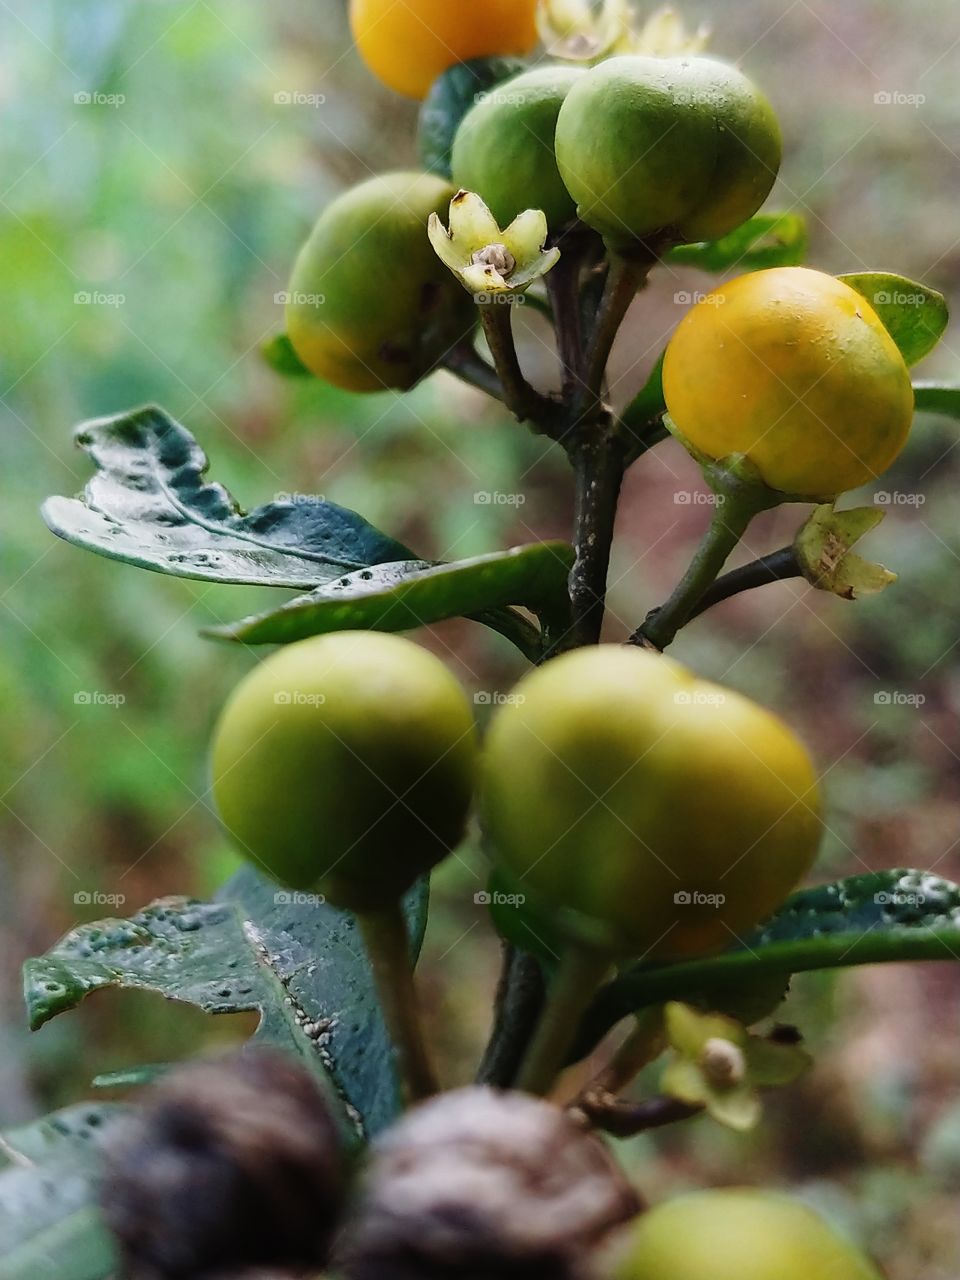 Branch of a plant with wild green and yellow berries with little yellow flowers and dark green leaves.